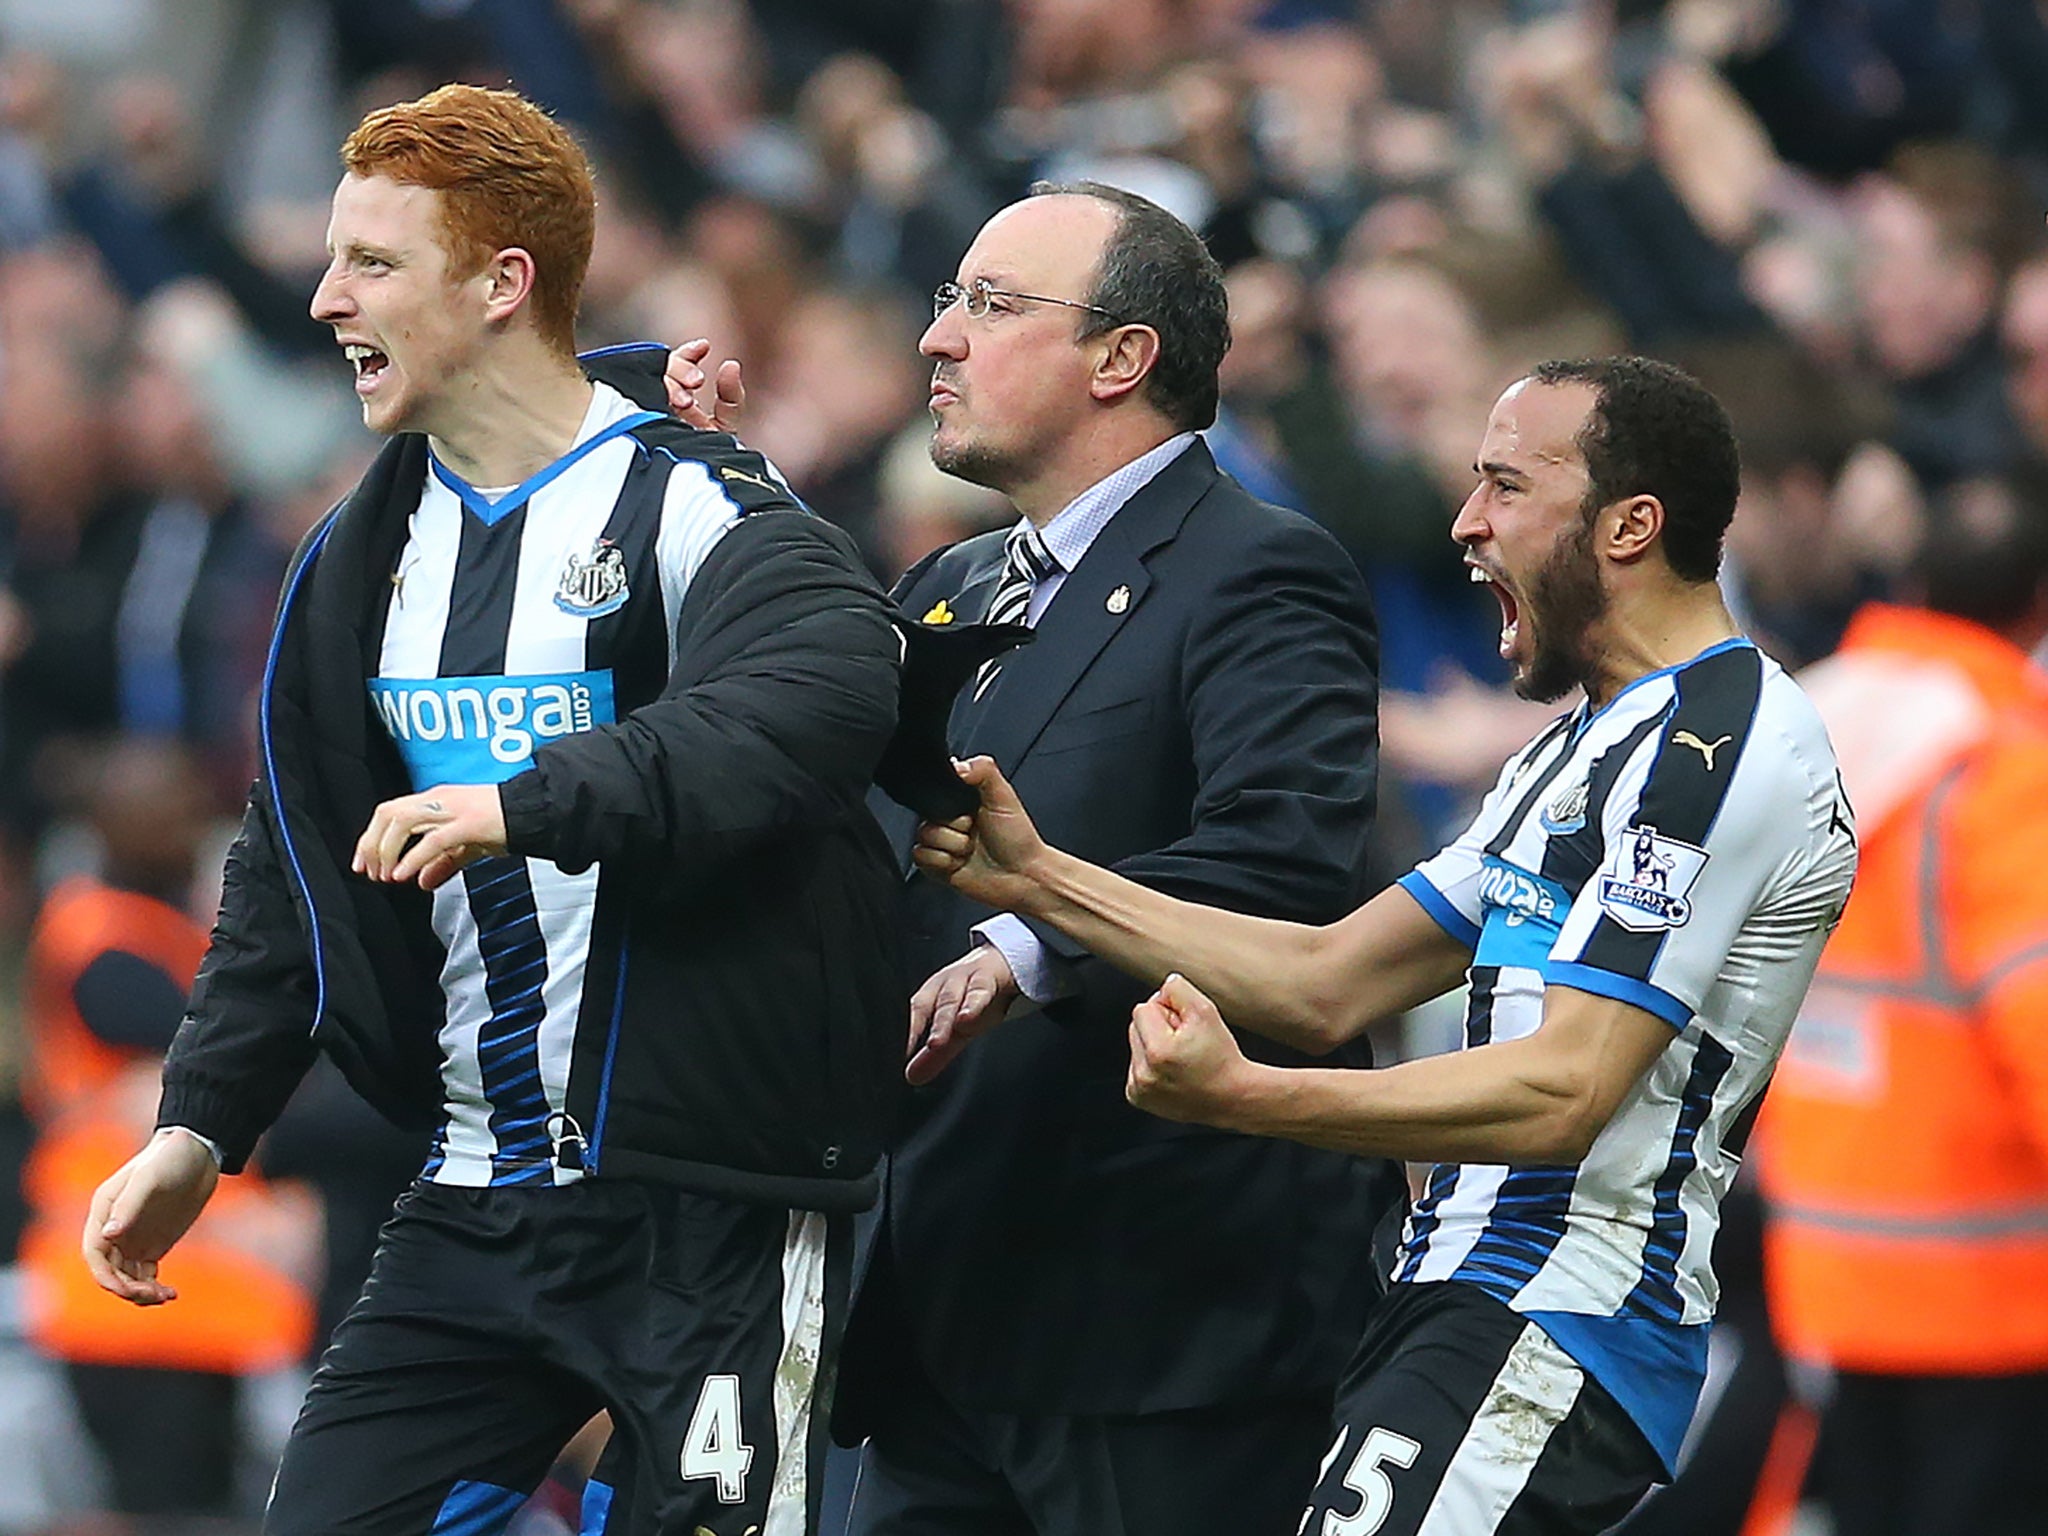 Rafael Benitez watches on during the Sunderland game with Jack Colback and Andros Townsend